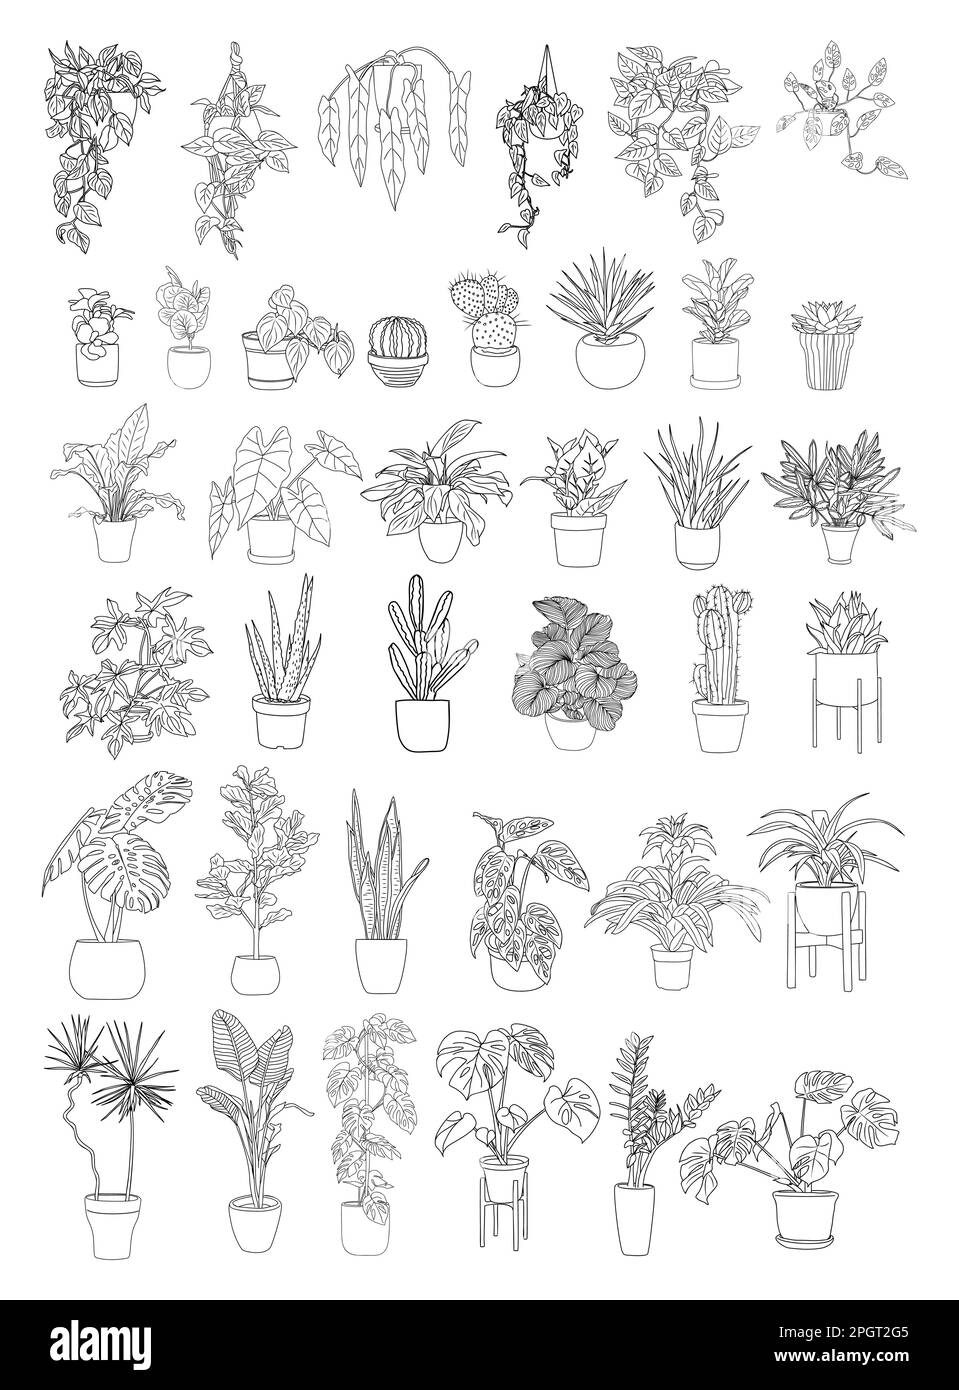 Big collection of House plants outline drawings Stock Vector Image ...